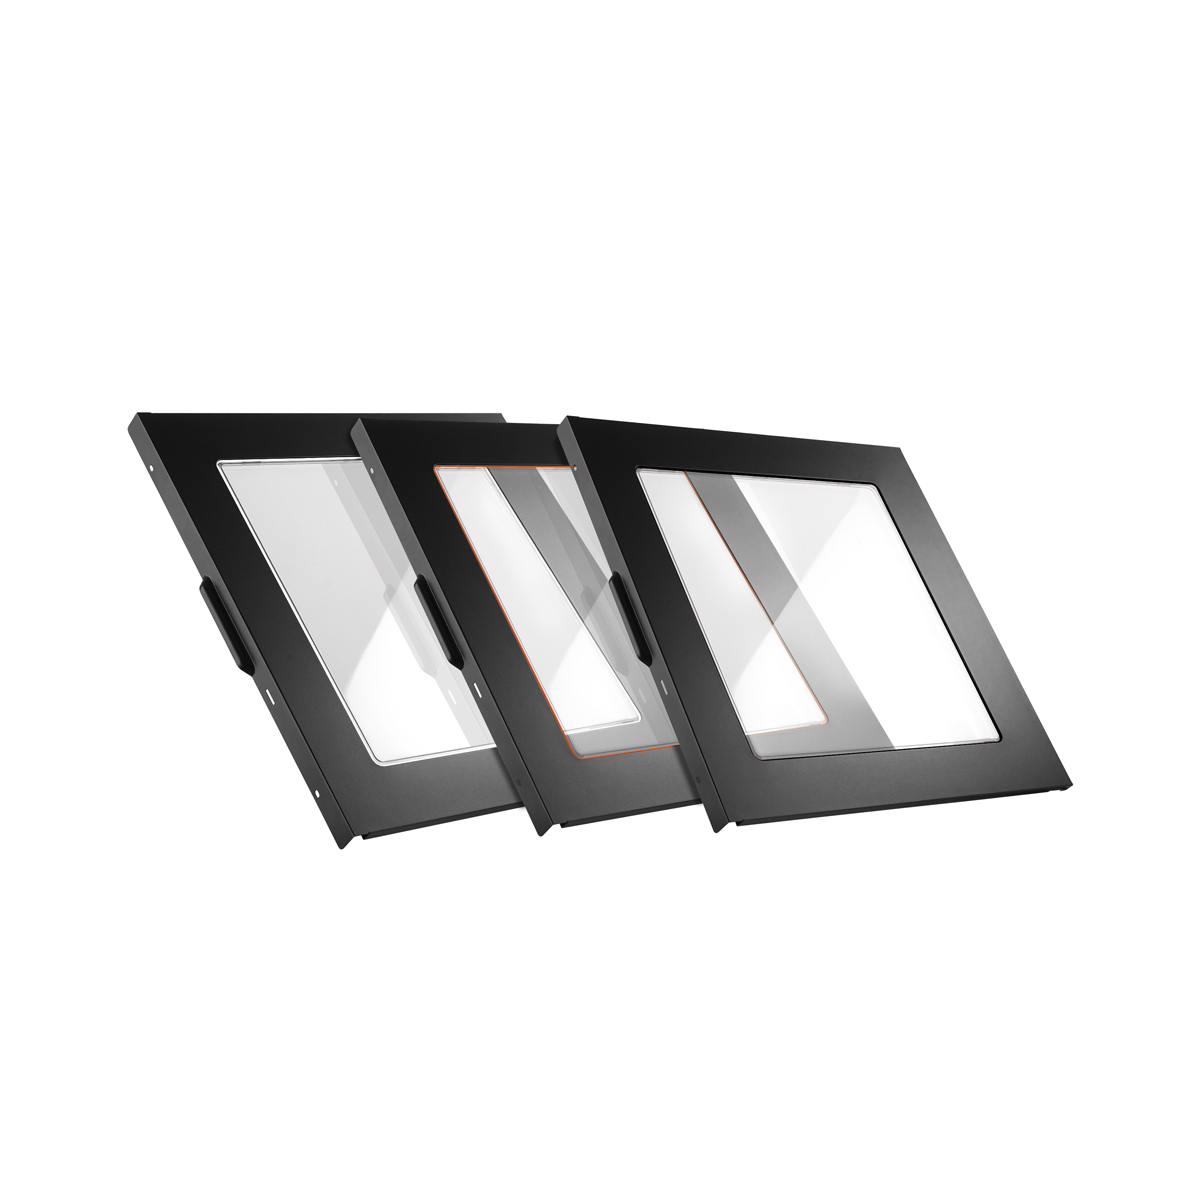 be quiet! - be quiet! Silent Base 800/600 Side Window - Black/Orange/Silver Seals Included